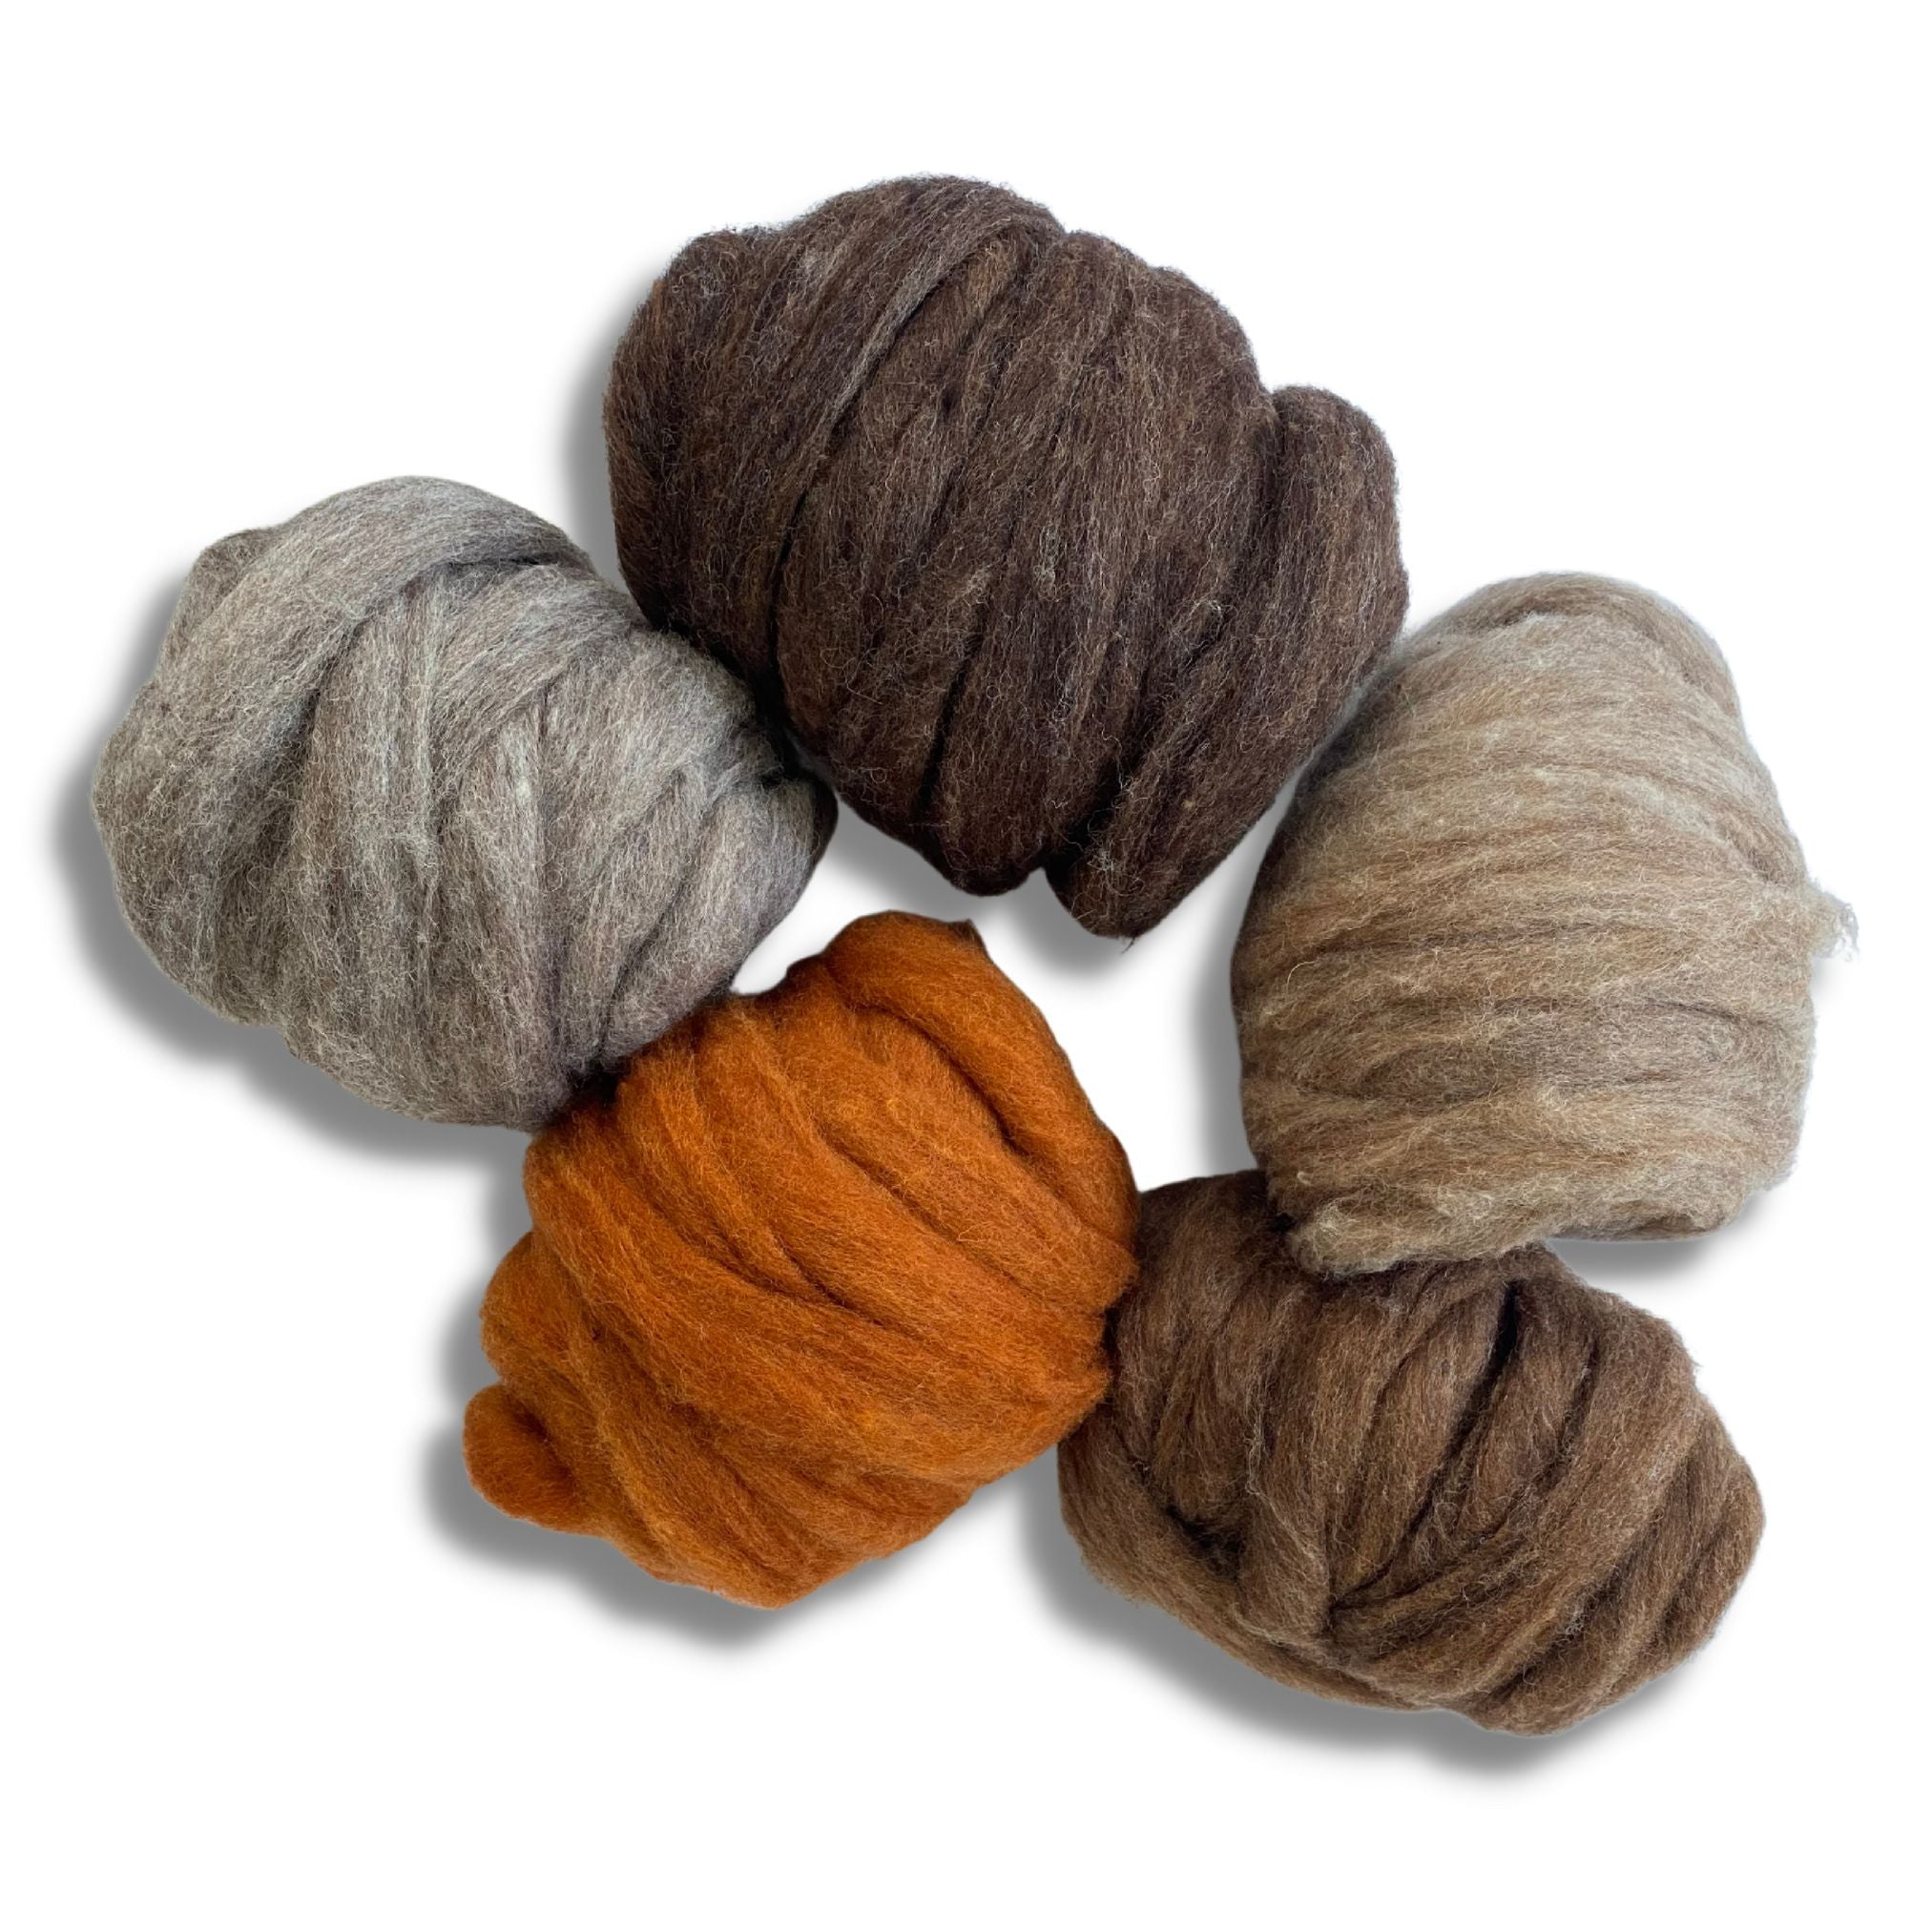 Carded Sliver Corriedale Wool - Furry Friends Variety Pack 2